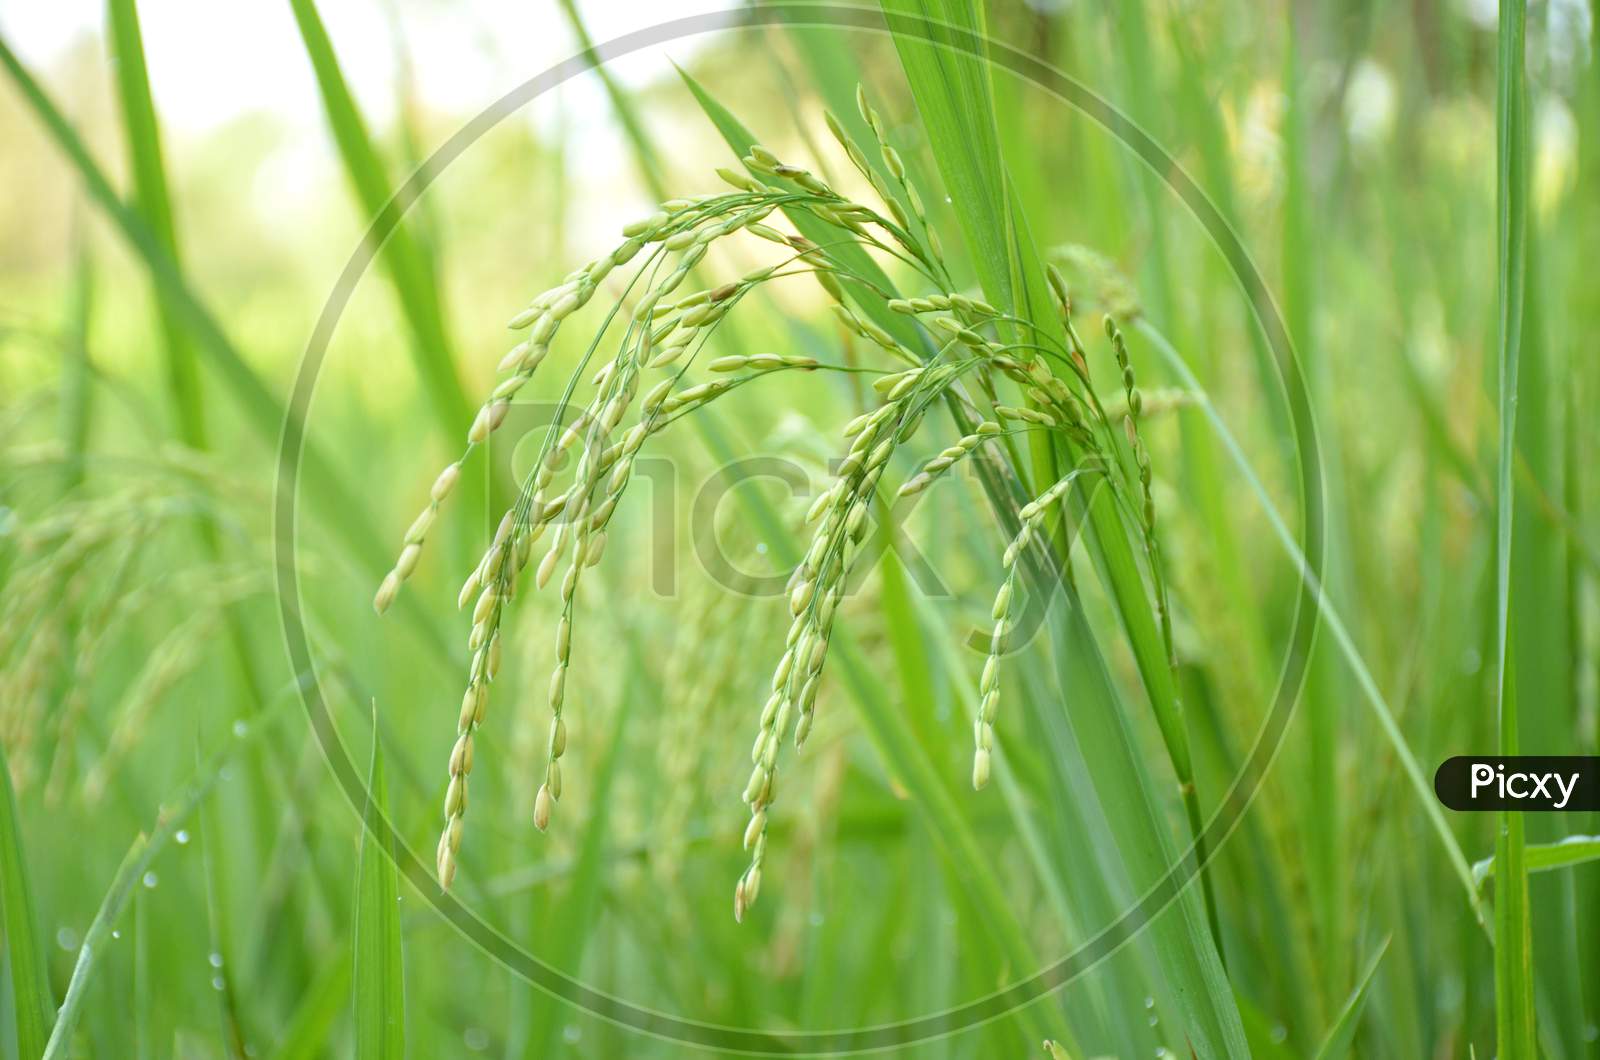 The Green Ripe Paddy Plant Grains In The Season.